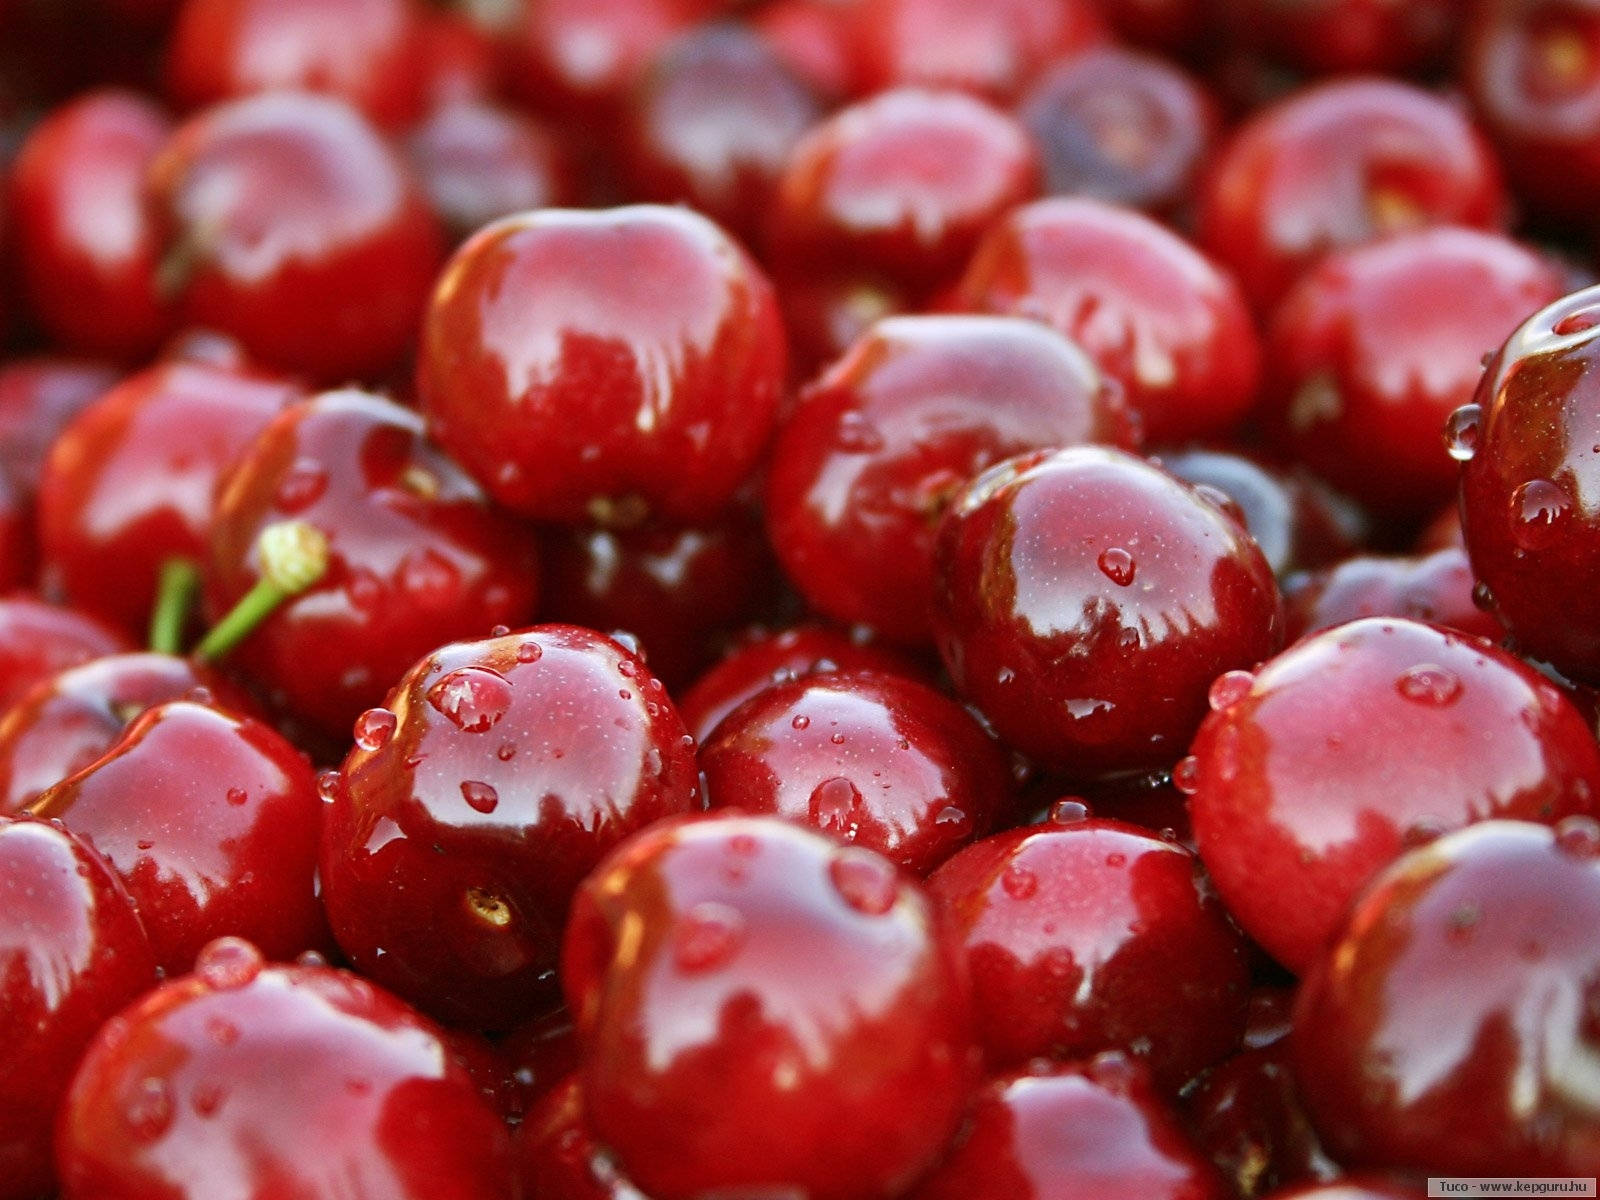 Cranberry Small Red Fruits Wallpaper